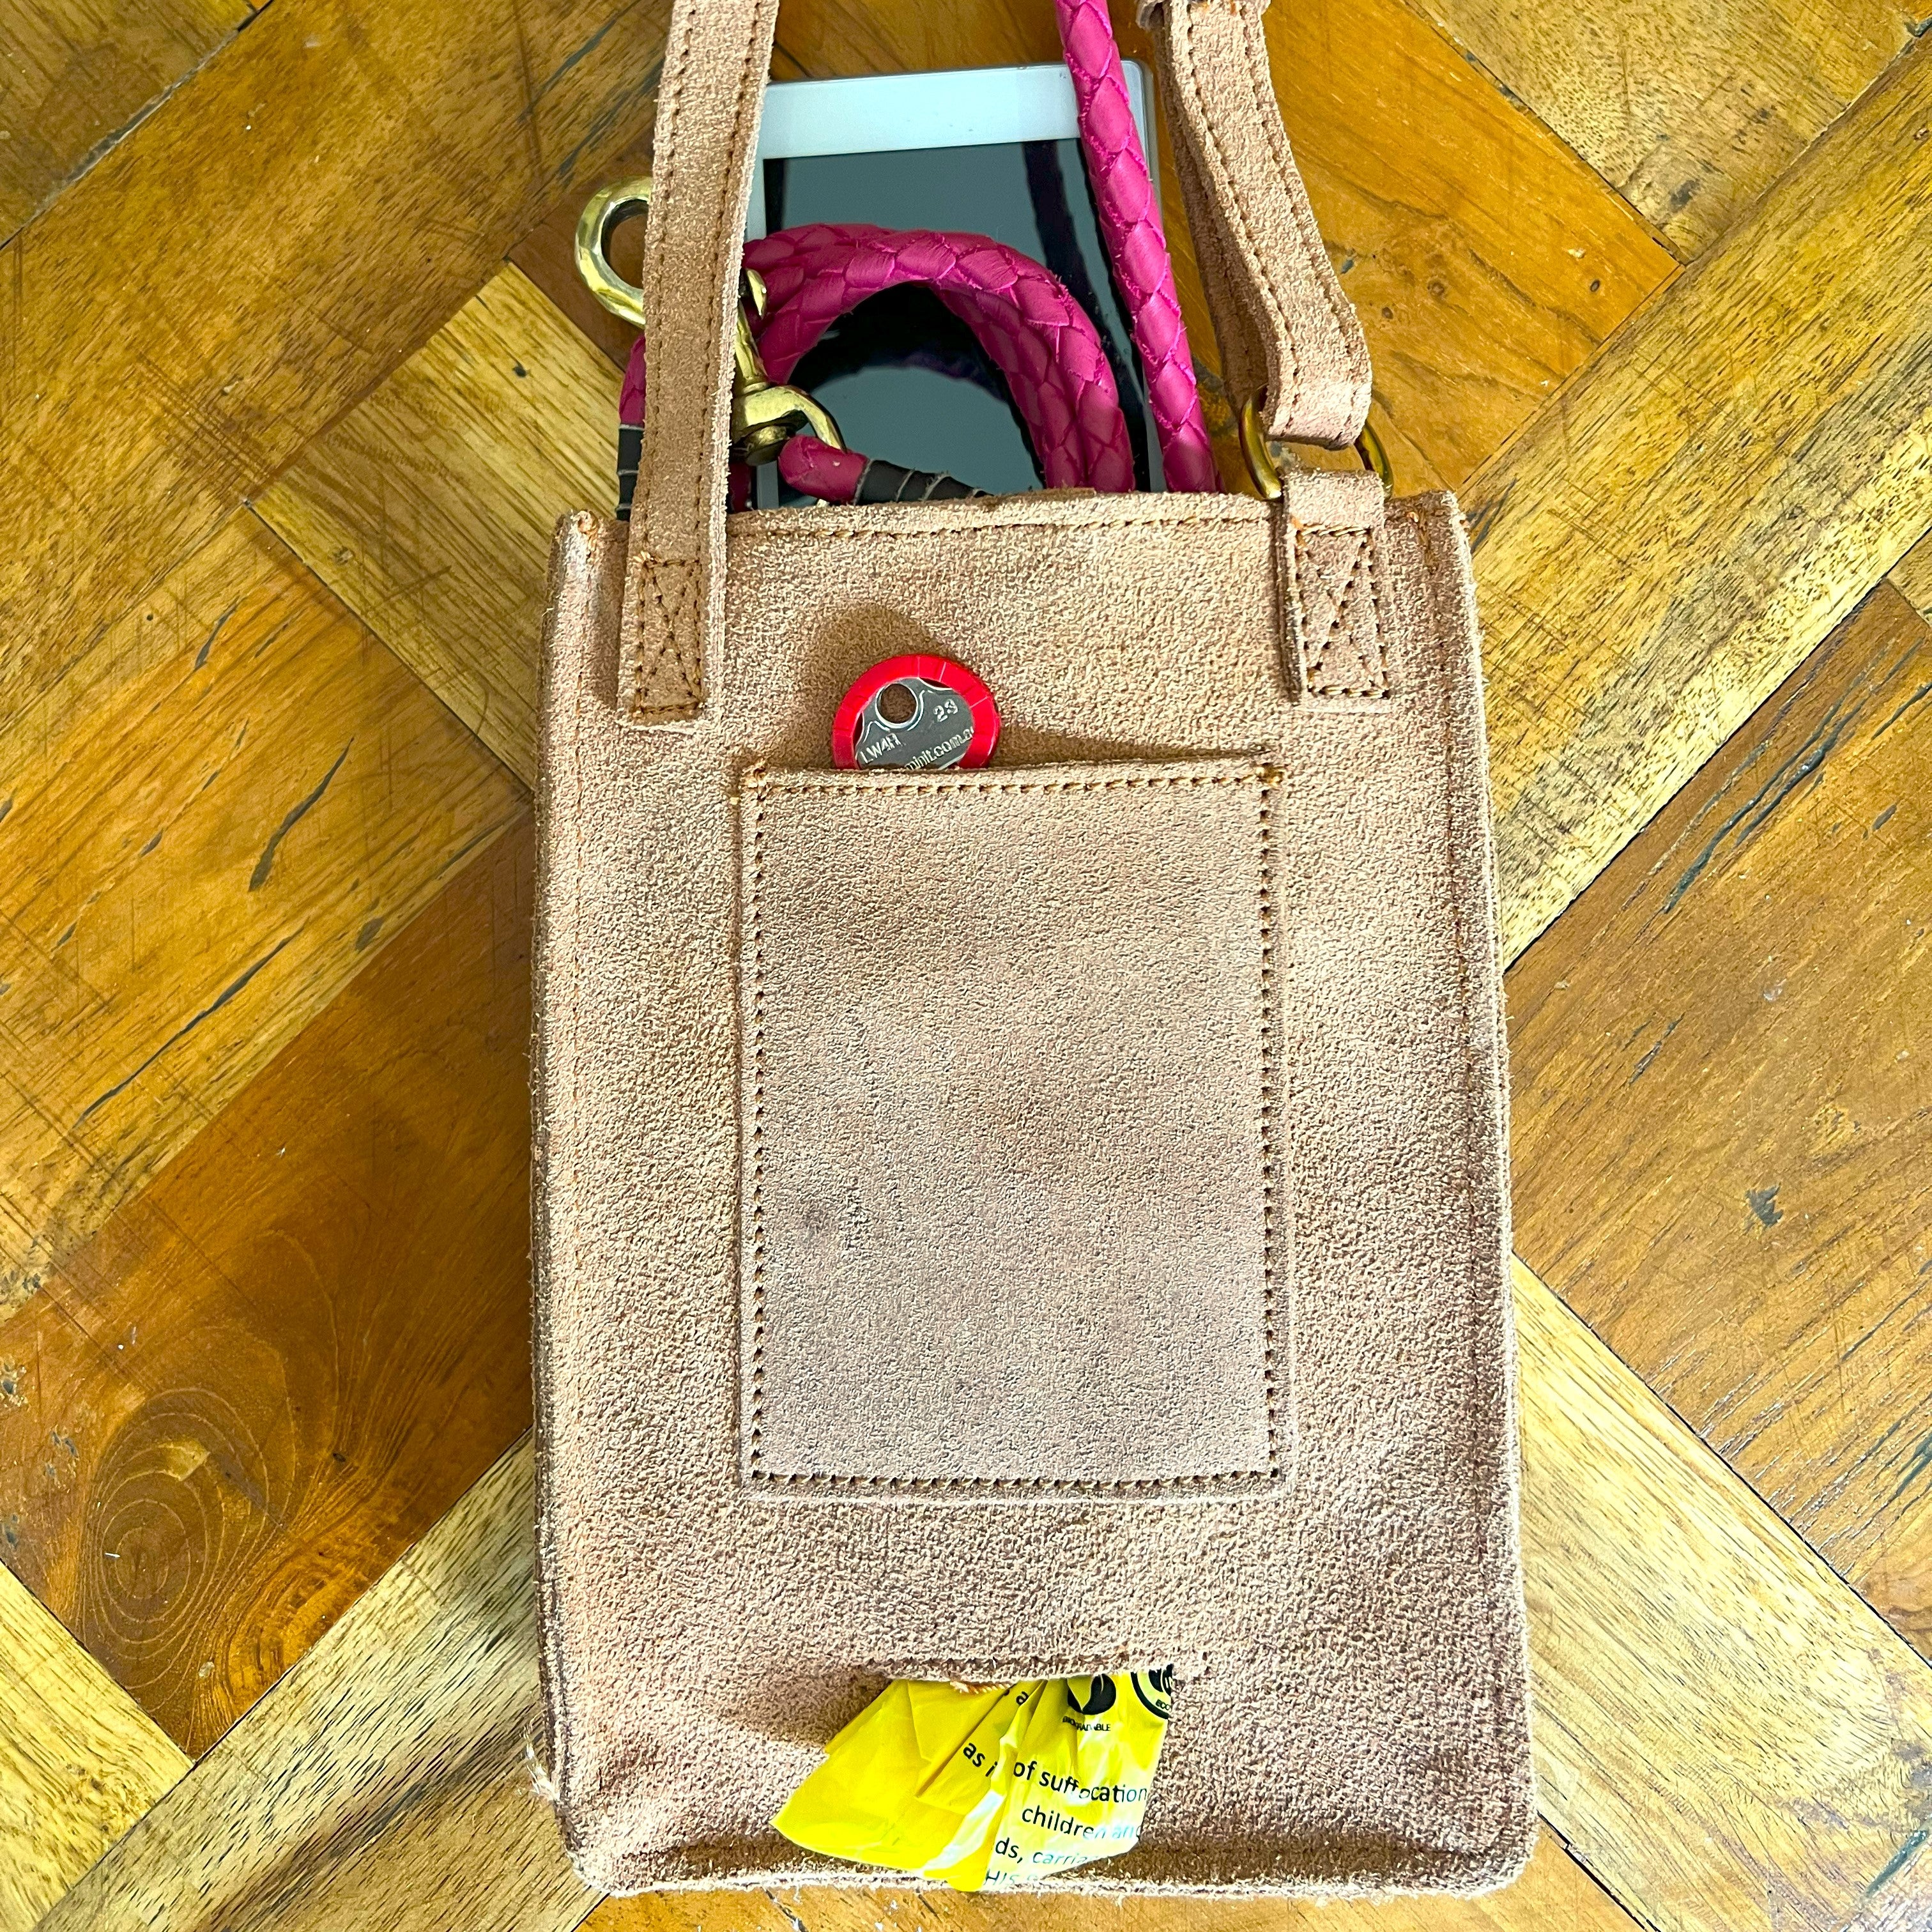 A tan Veg Tanned Leather tote bag with pink woven handles sits on a wooden floor. The Georgie Paws Dog Walk Bag - Raw is partially filled, showing a bright pink scarf, a red circular tag, and yellow packaging peeking